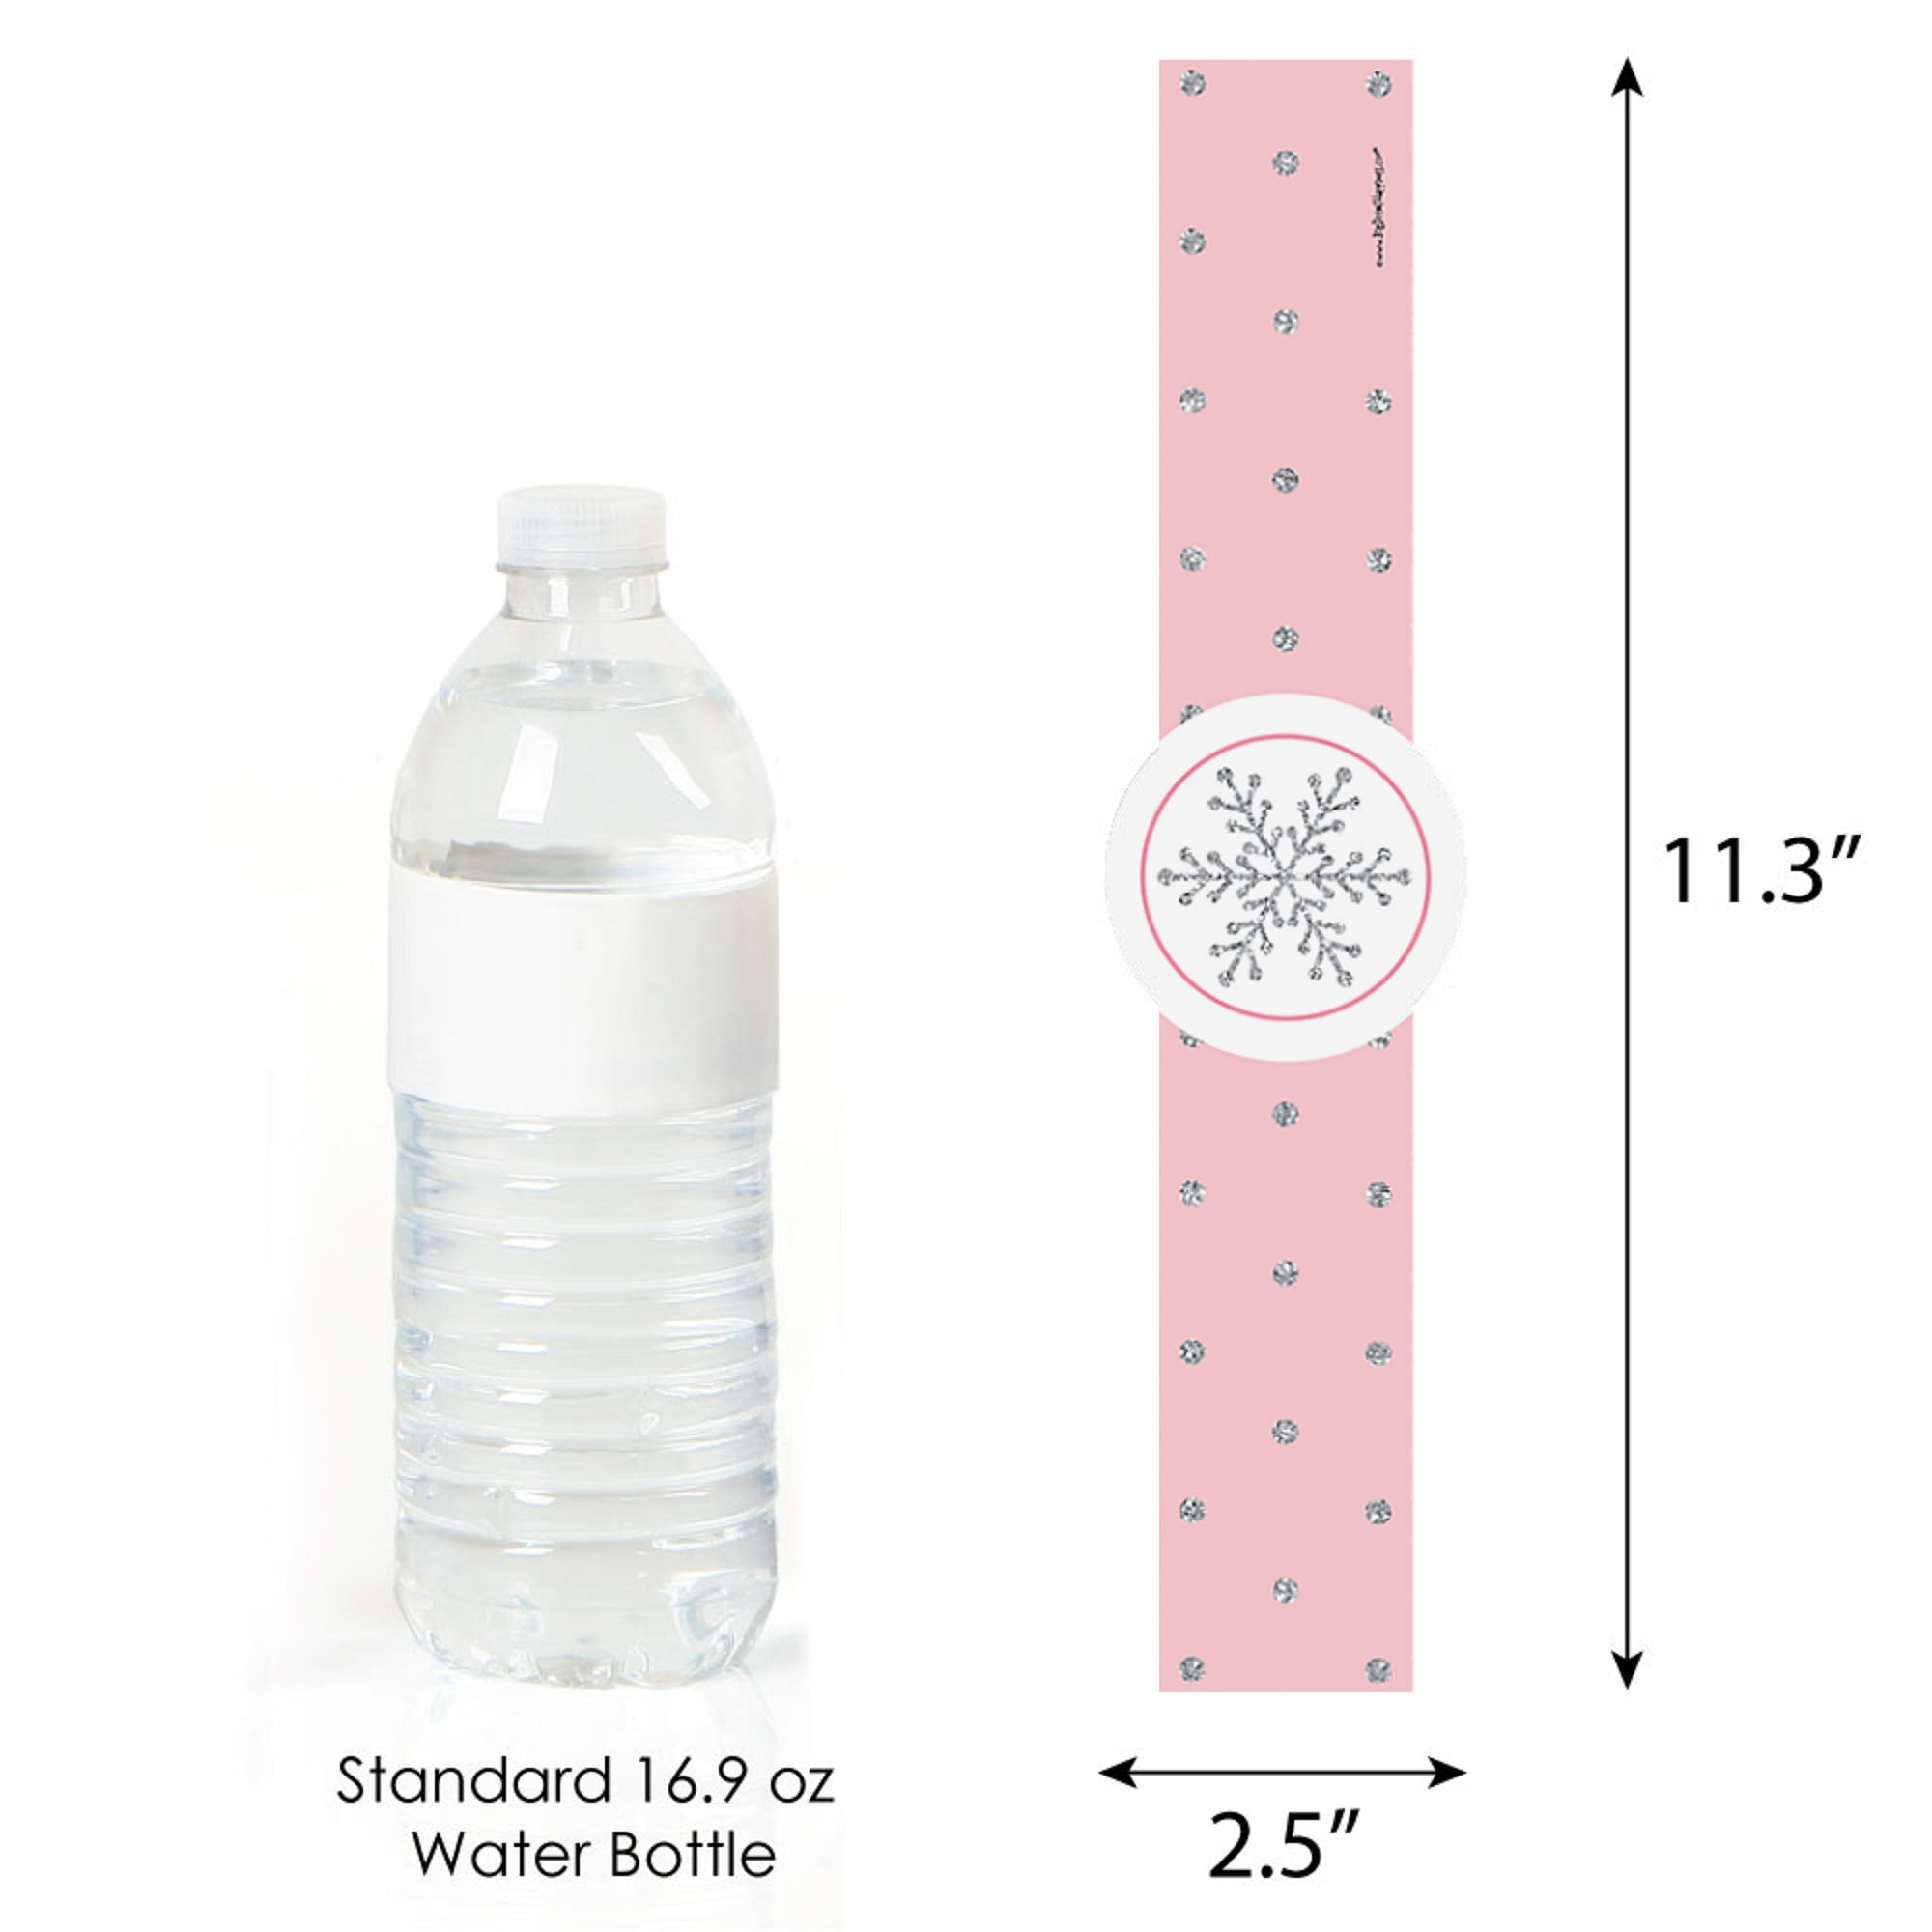 Big Dot of Happiness Pink Winter Wonderland - Holiday Snowflake Birthday Party and Baby Shower Clear Goodie Favor Bags - Treat Bags with Tags 12 ct